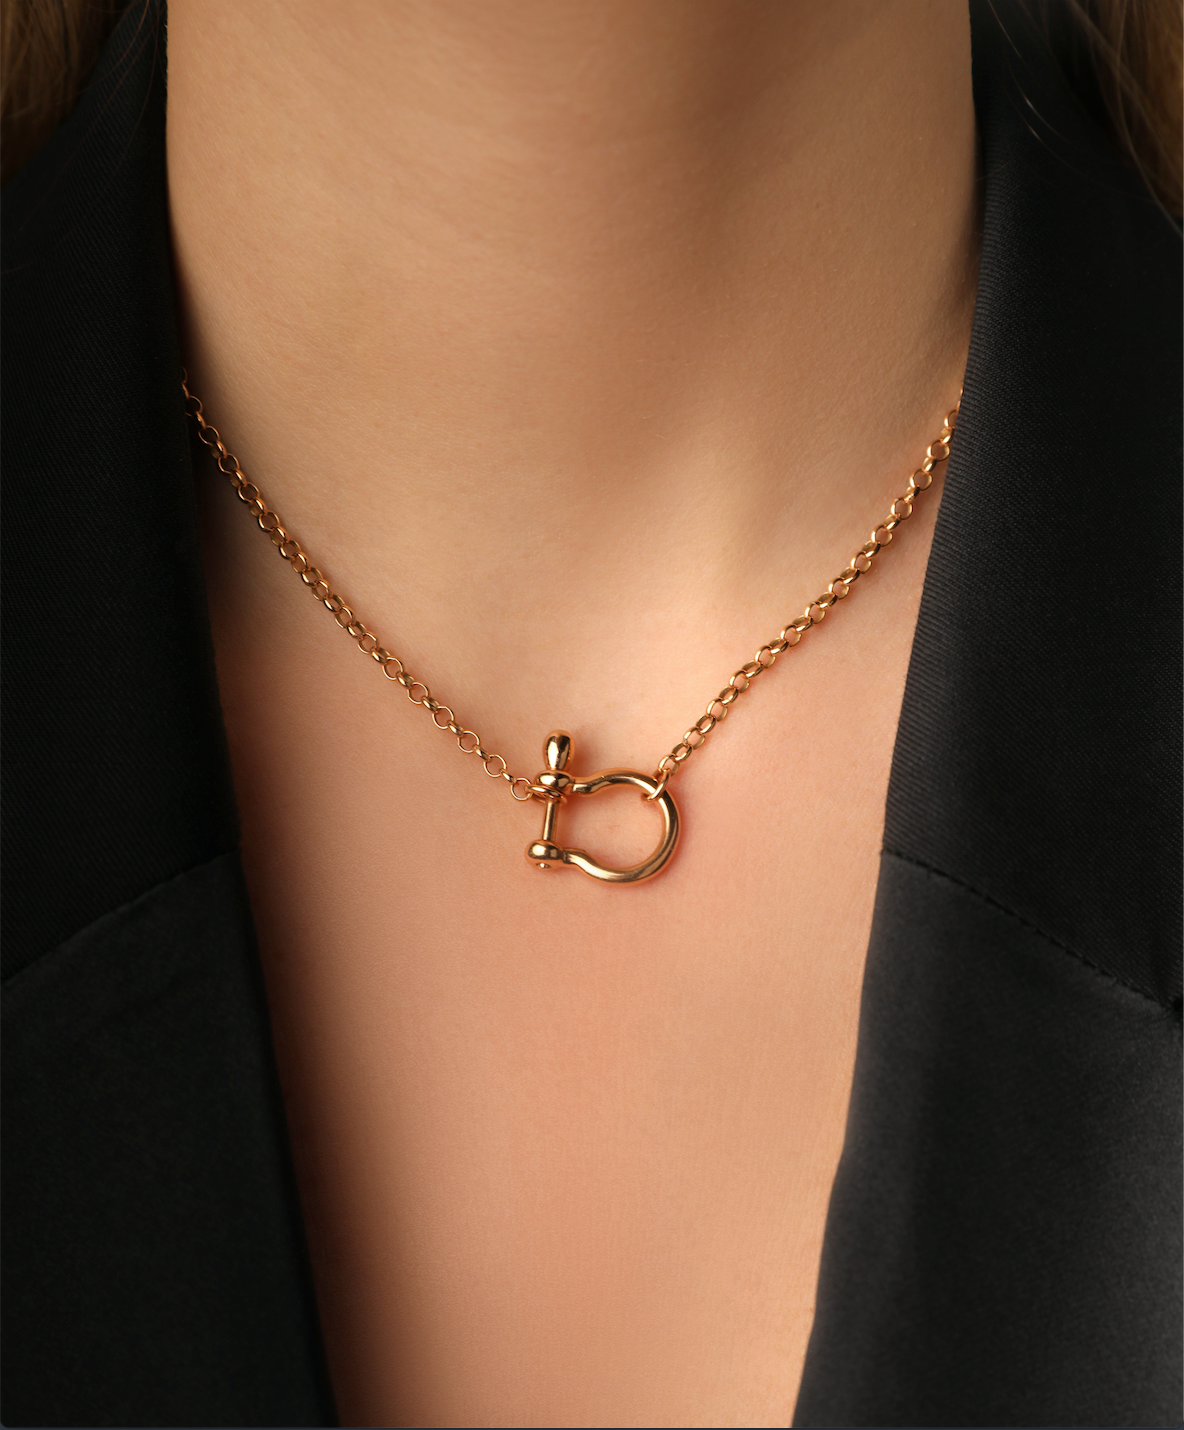 asymmetric, clasp, chain, gold, necklace